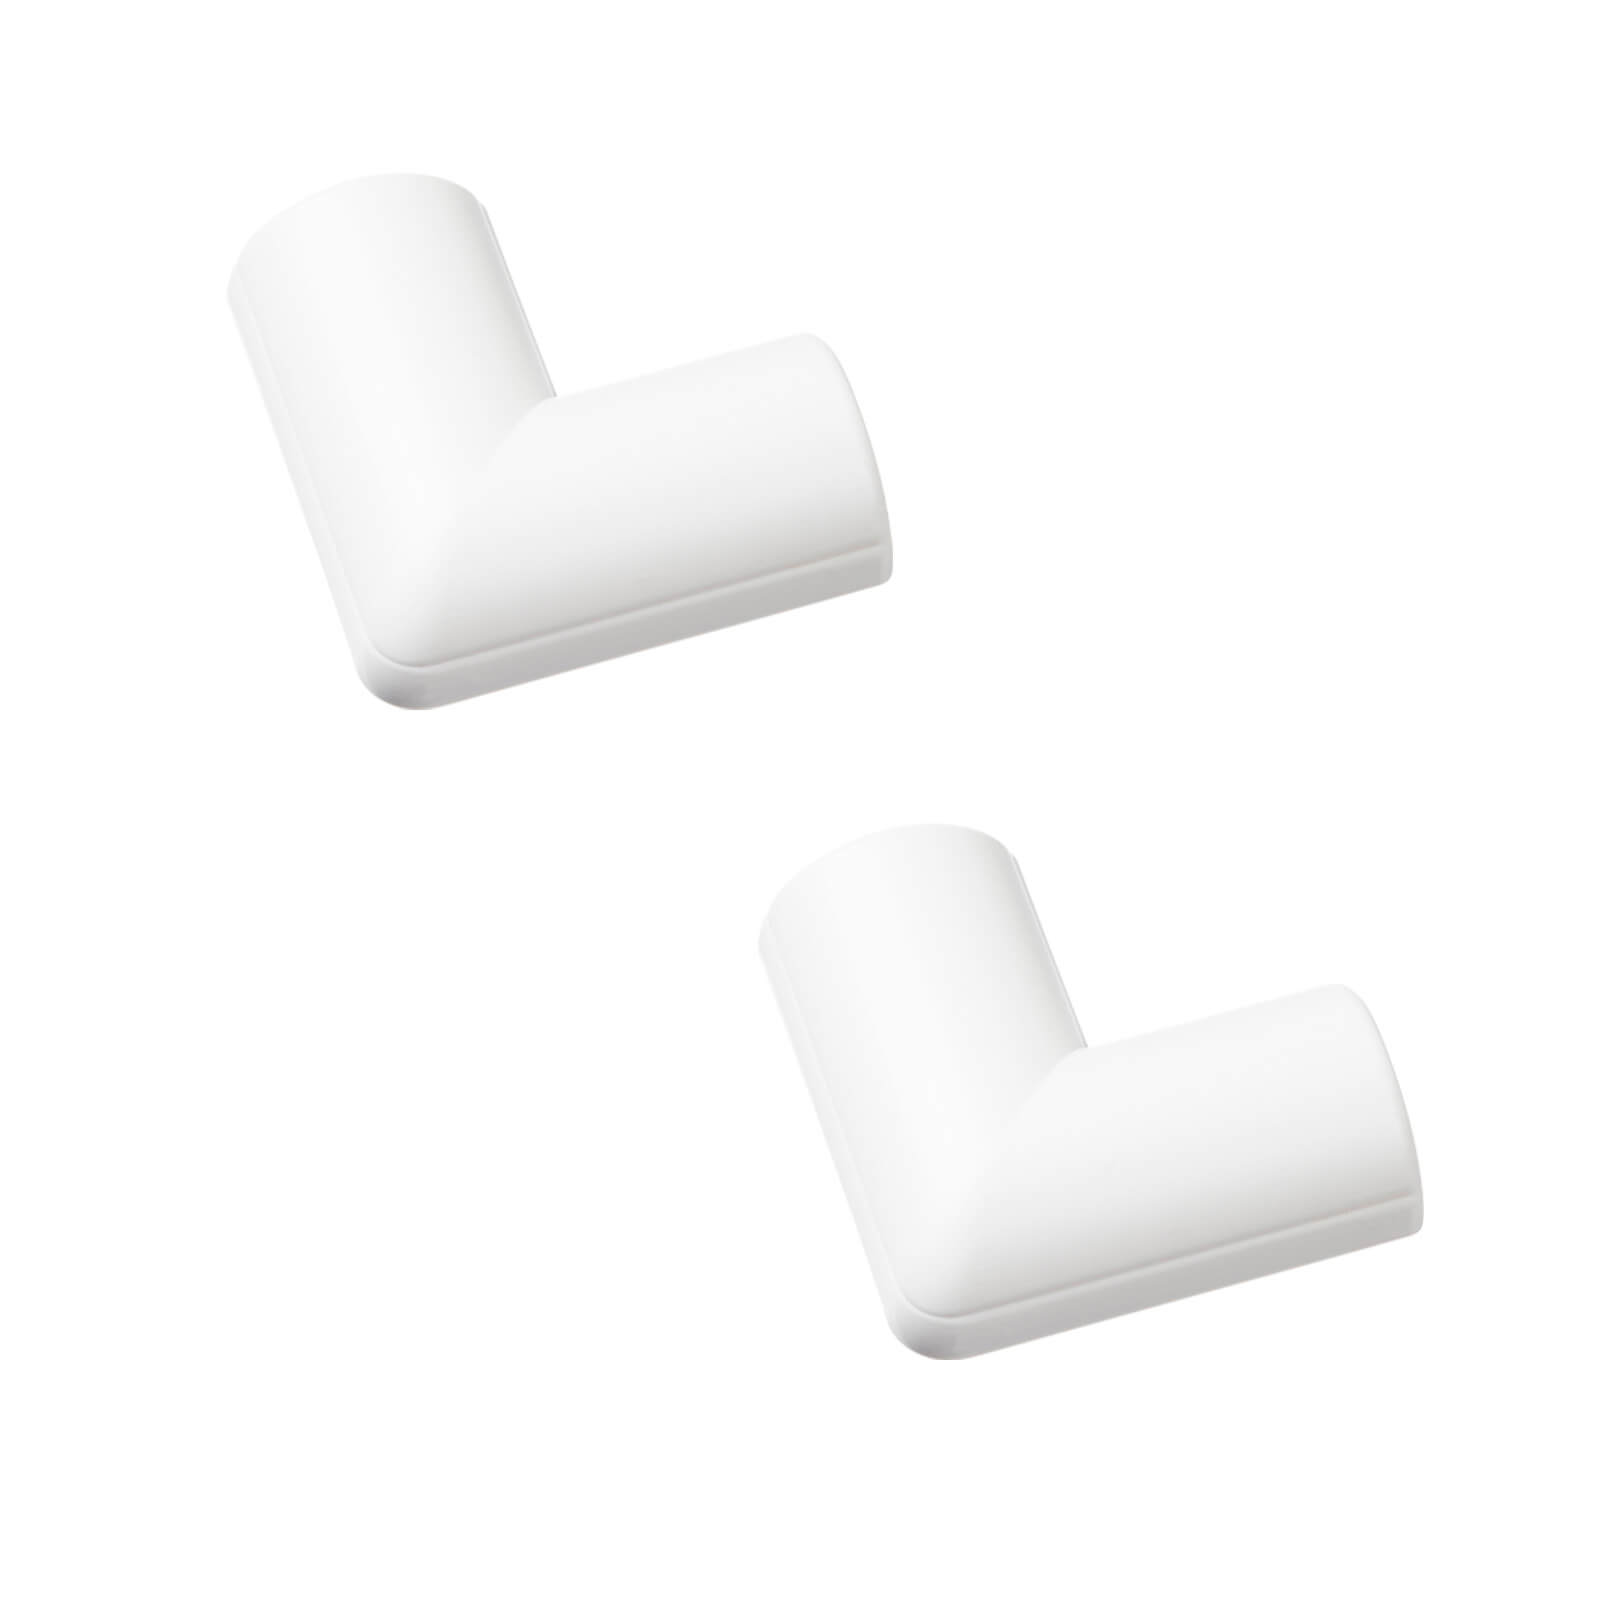 D-Line Mini Decorative Trunking Clip Over Flat Bends 2 Pack 30mm x 15mm White